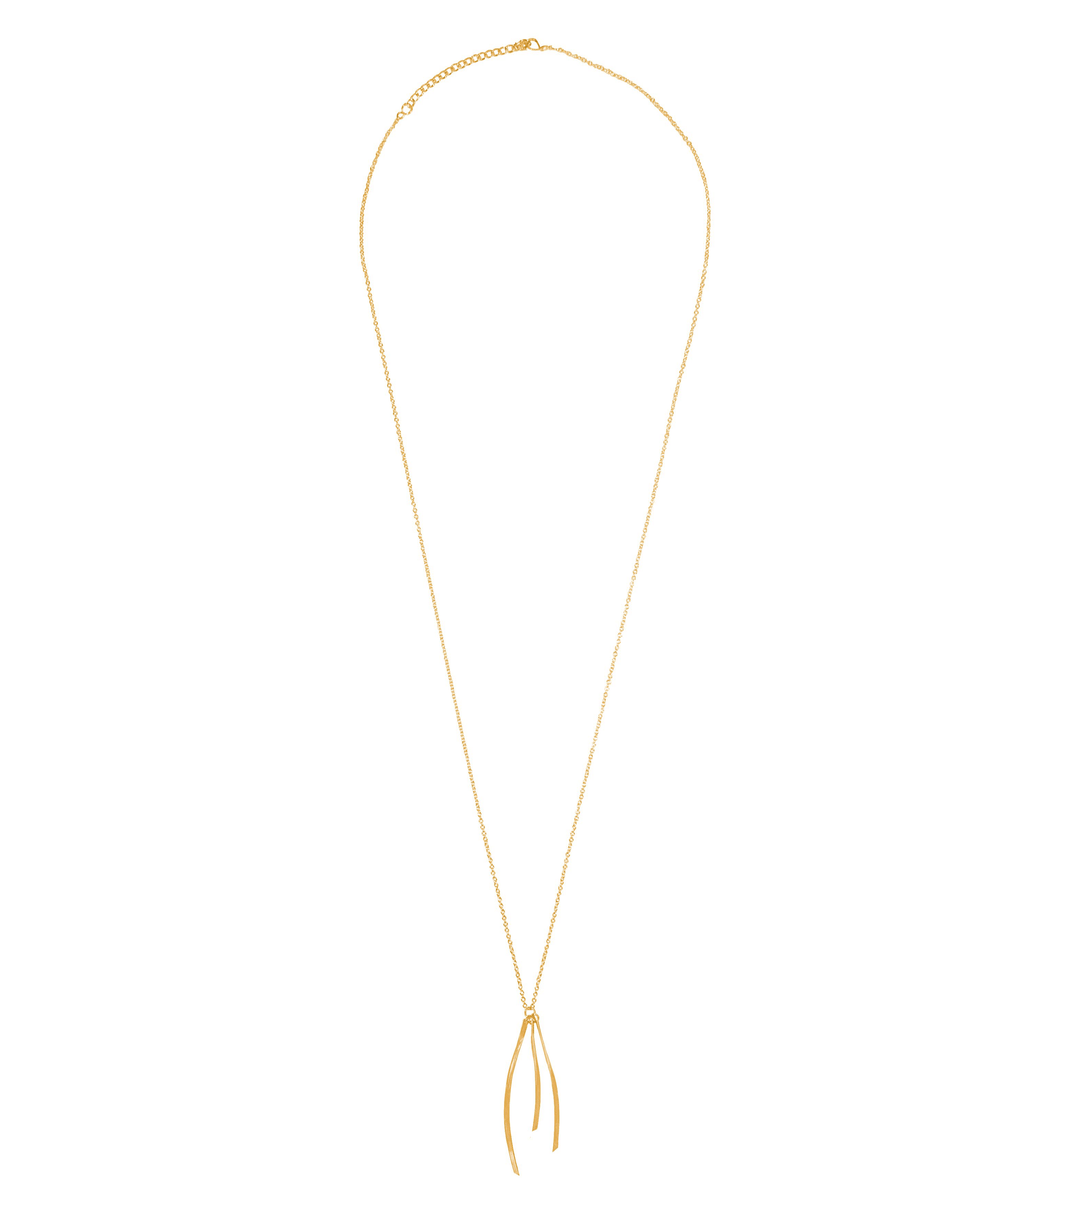 Kailani Necklace - Ethical Trade Co